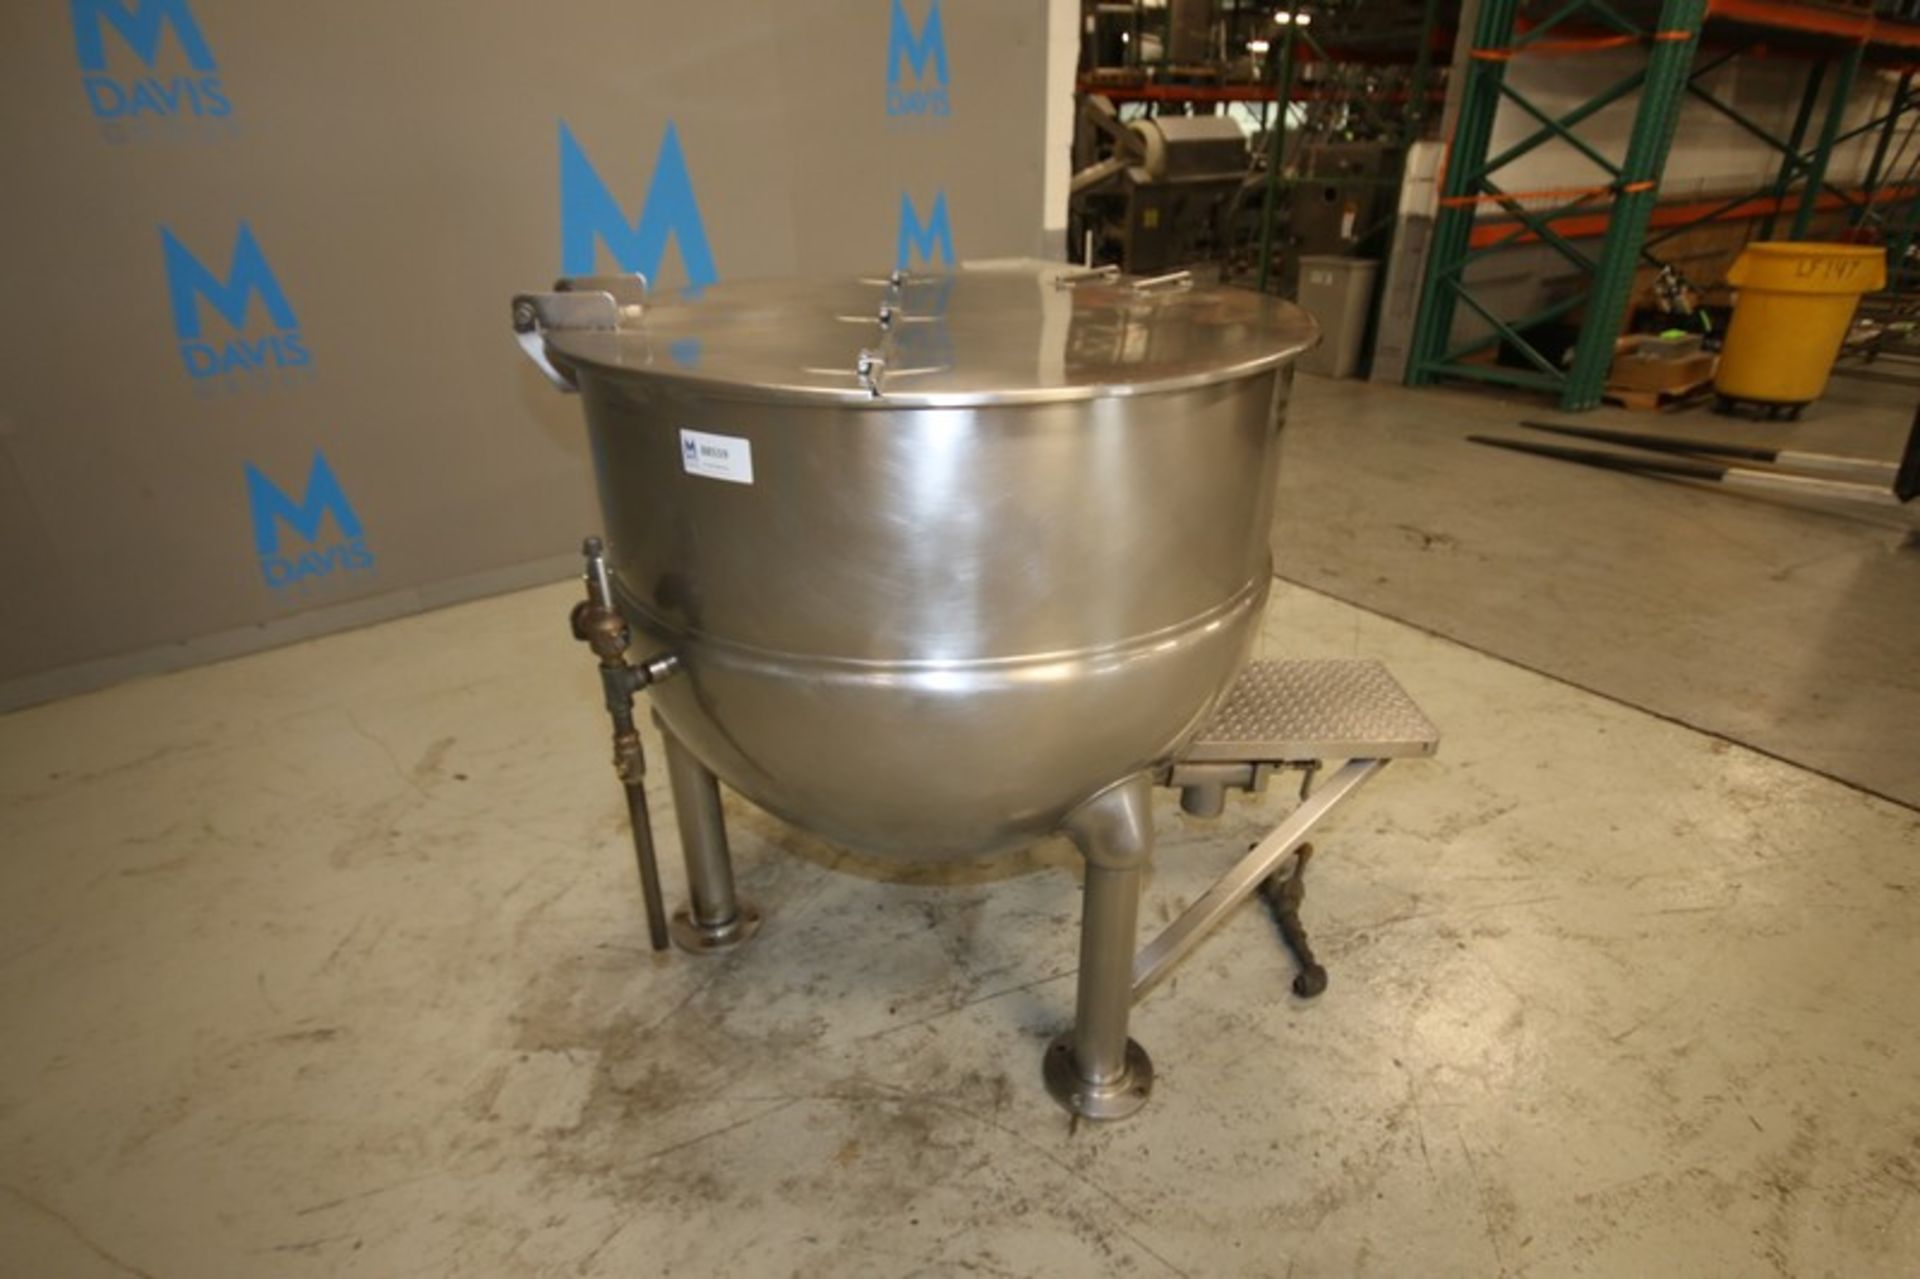 Groen 150 Gallon S/S Jacketed Kettle, Model FT-150 SN 81076-2, with Hinged Lid, 3" Threaded Bottom - Image 5 of 7